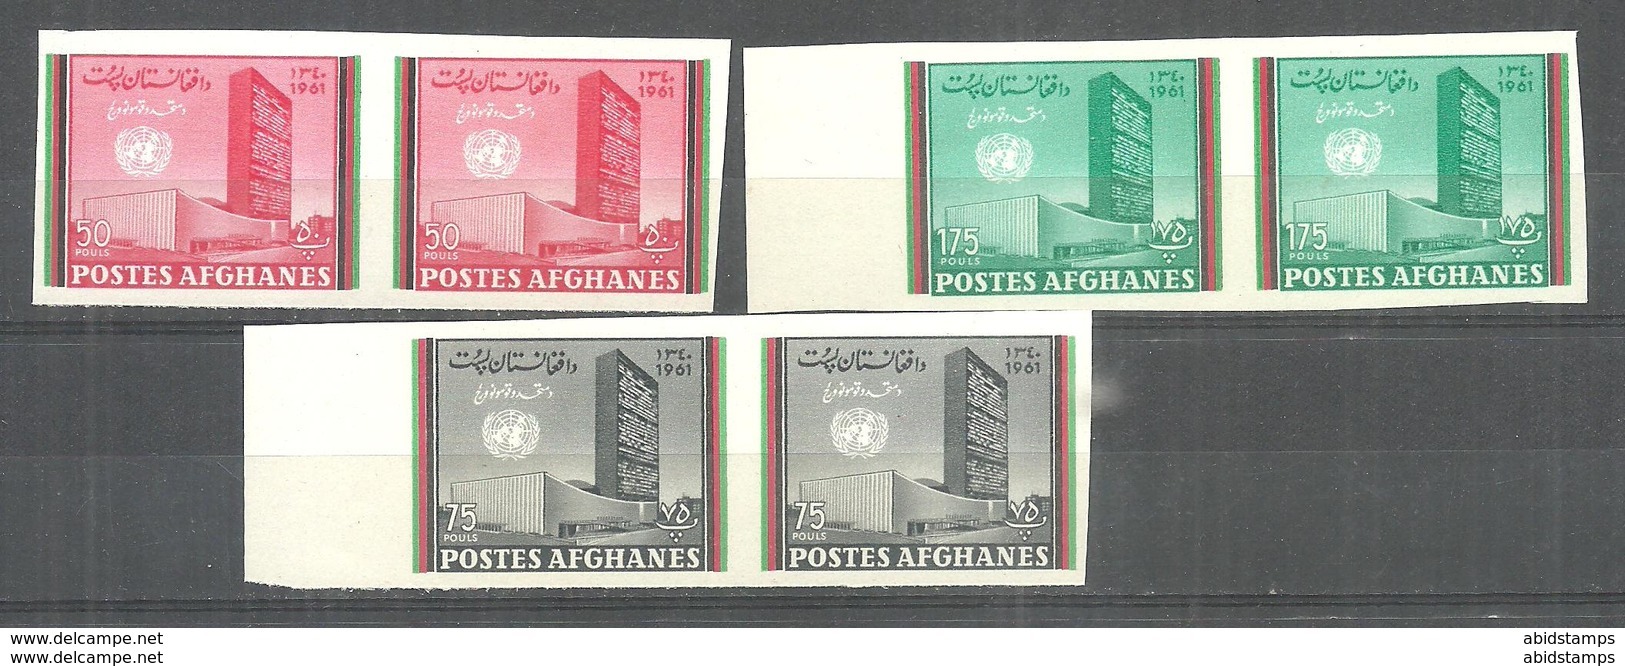 AFGHANISTAN STAMPS 1961 NEW UNO BUILDING IMPERF PAIR MNH - Afghanistan